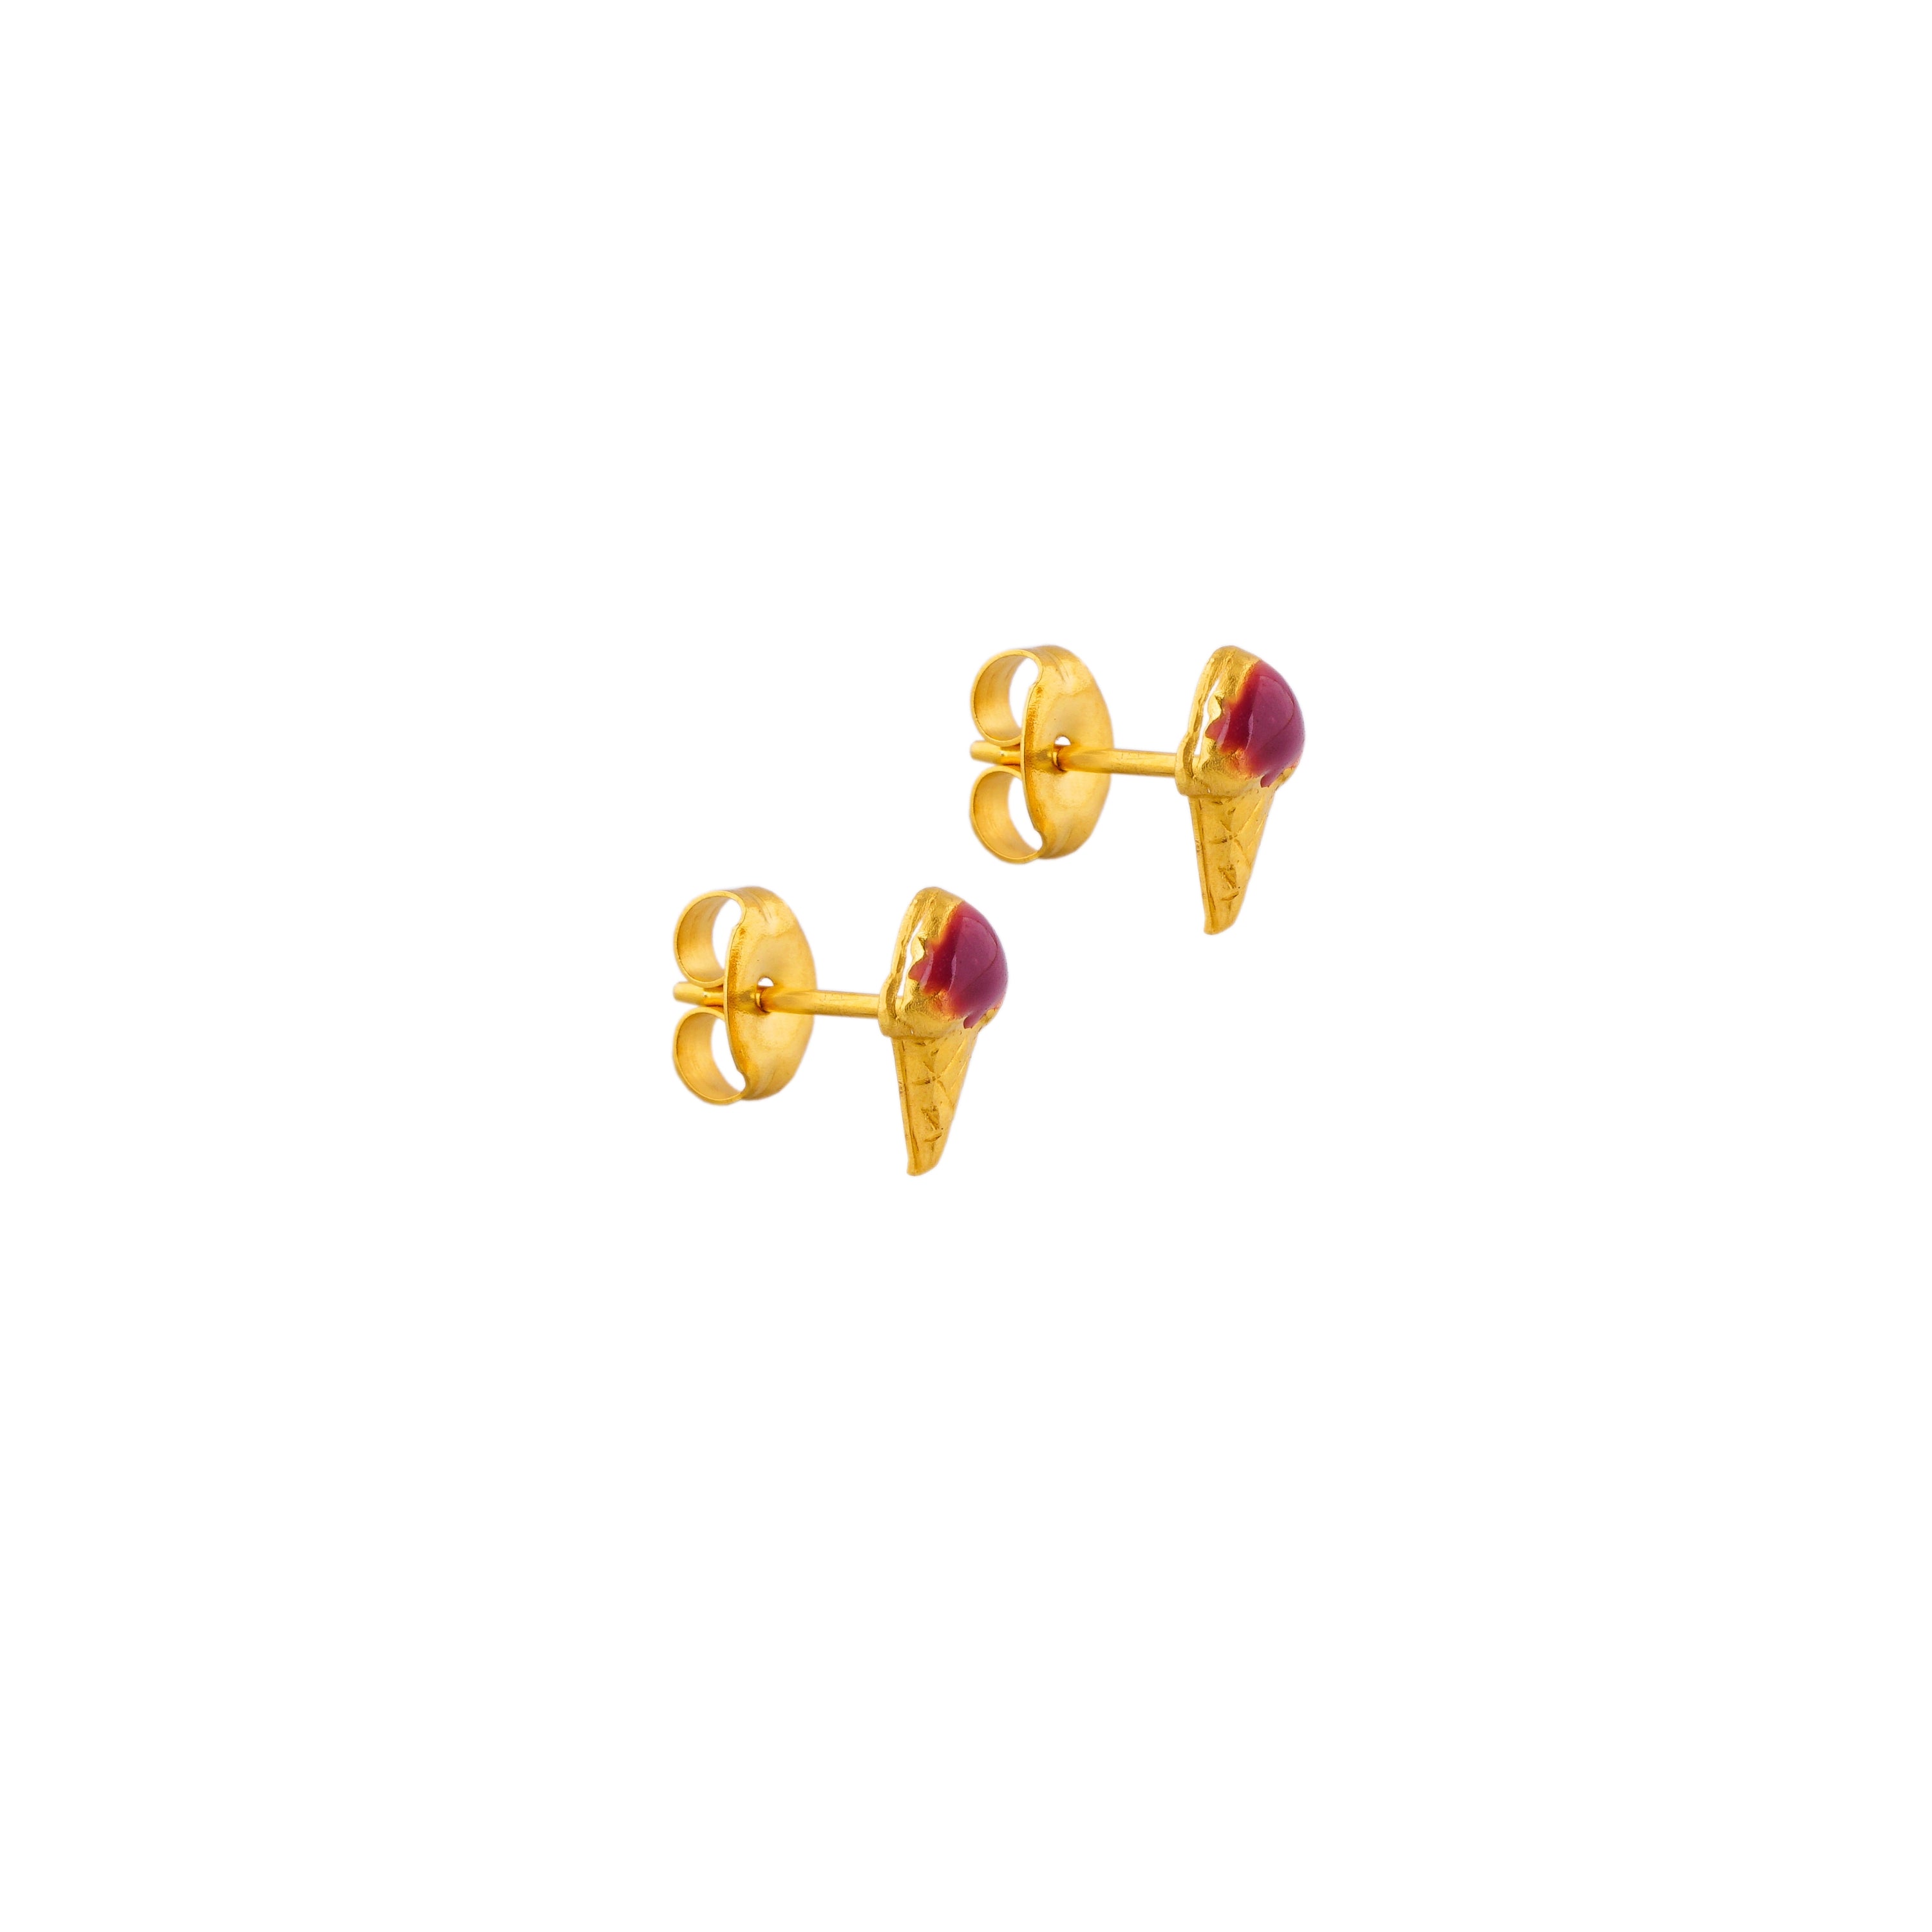 Ice-Cream Shape 24K Pure Gold Plated Ear Studs For Kids | Ideal for everyday wear